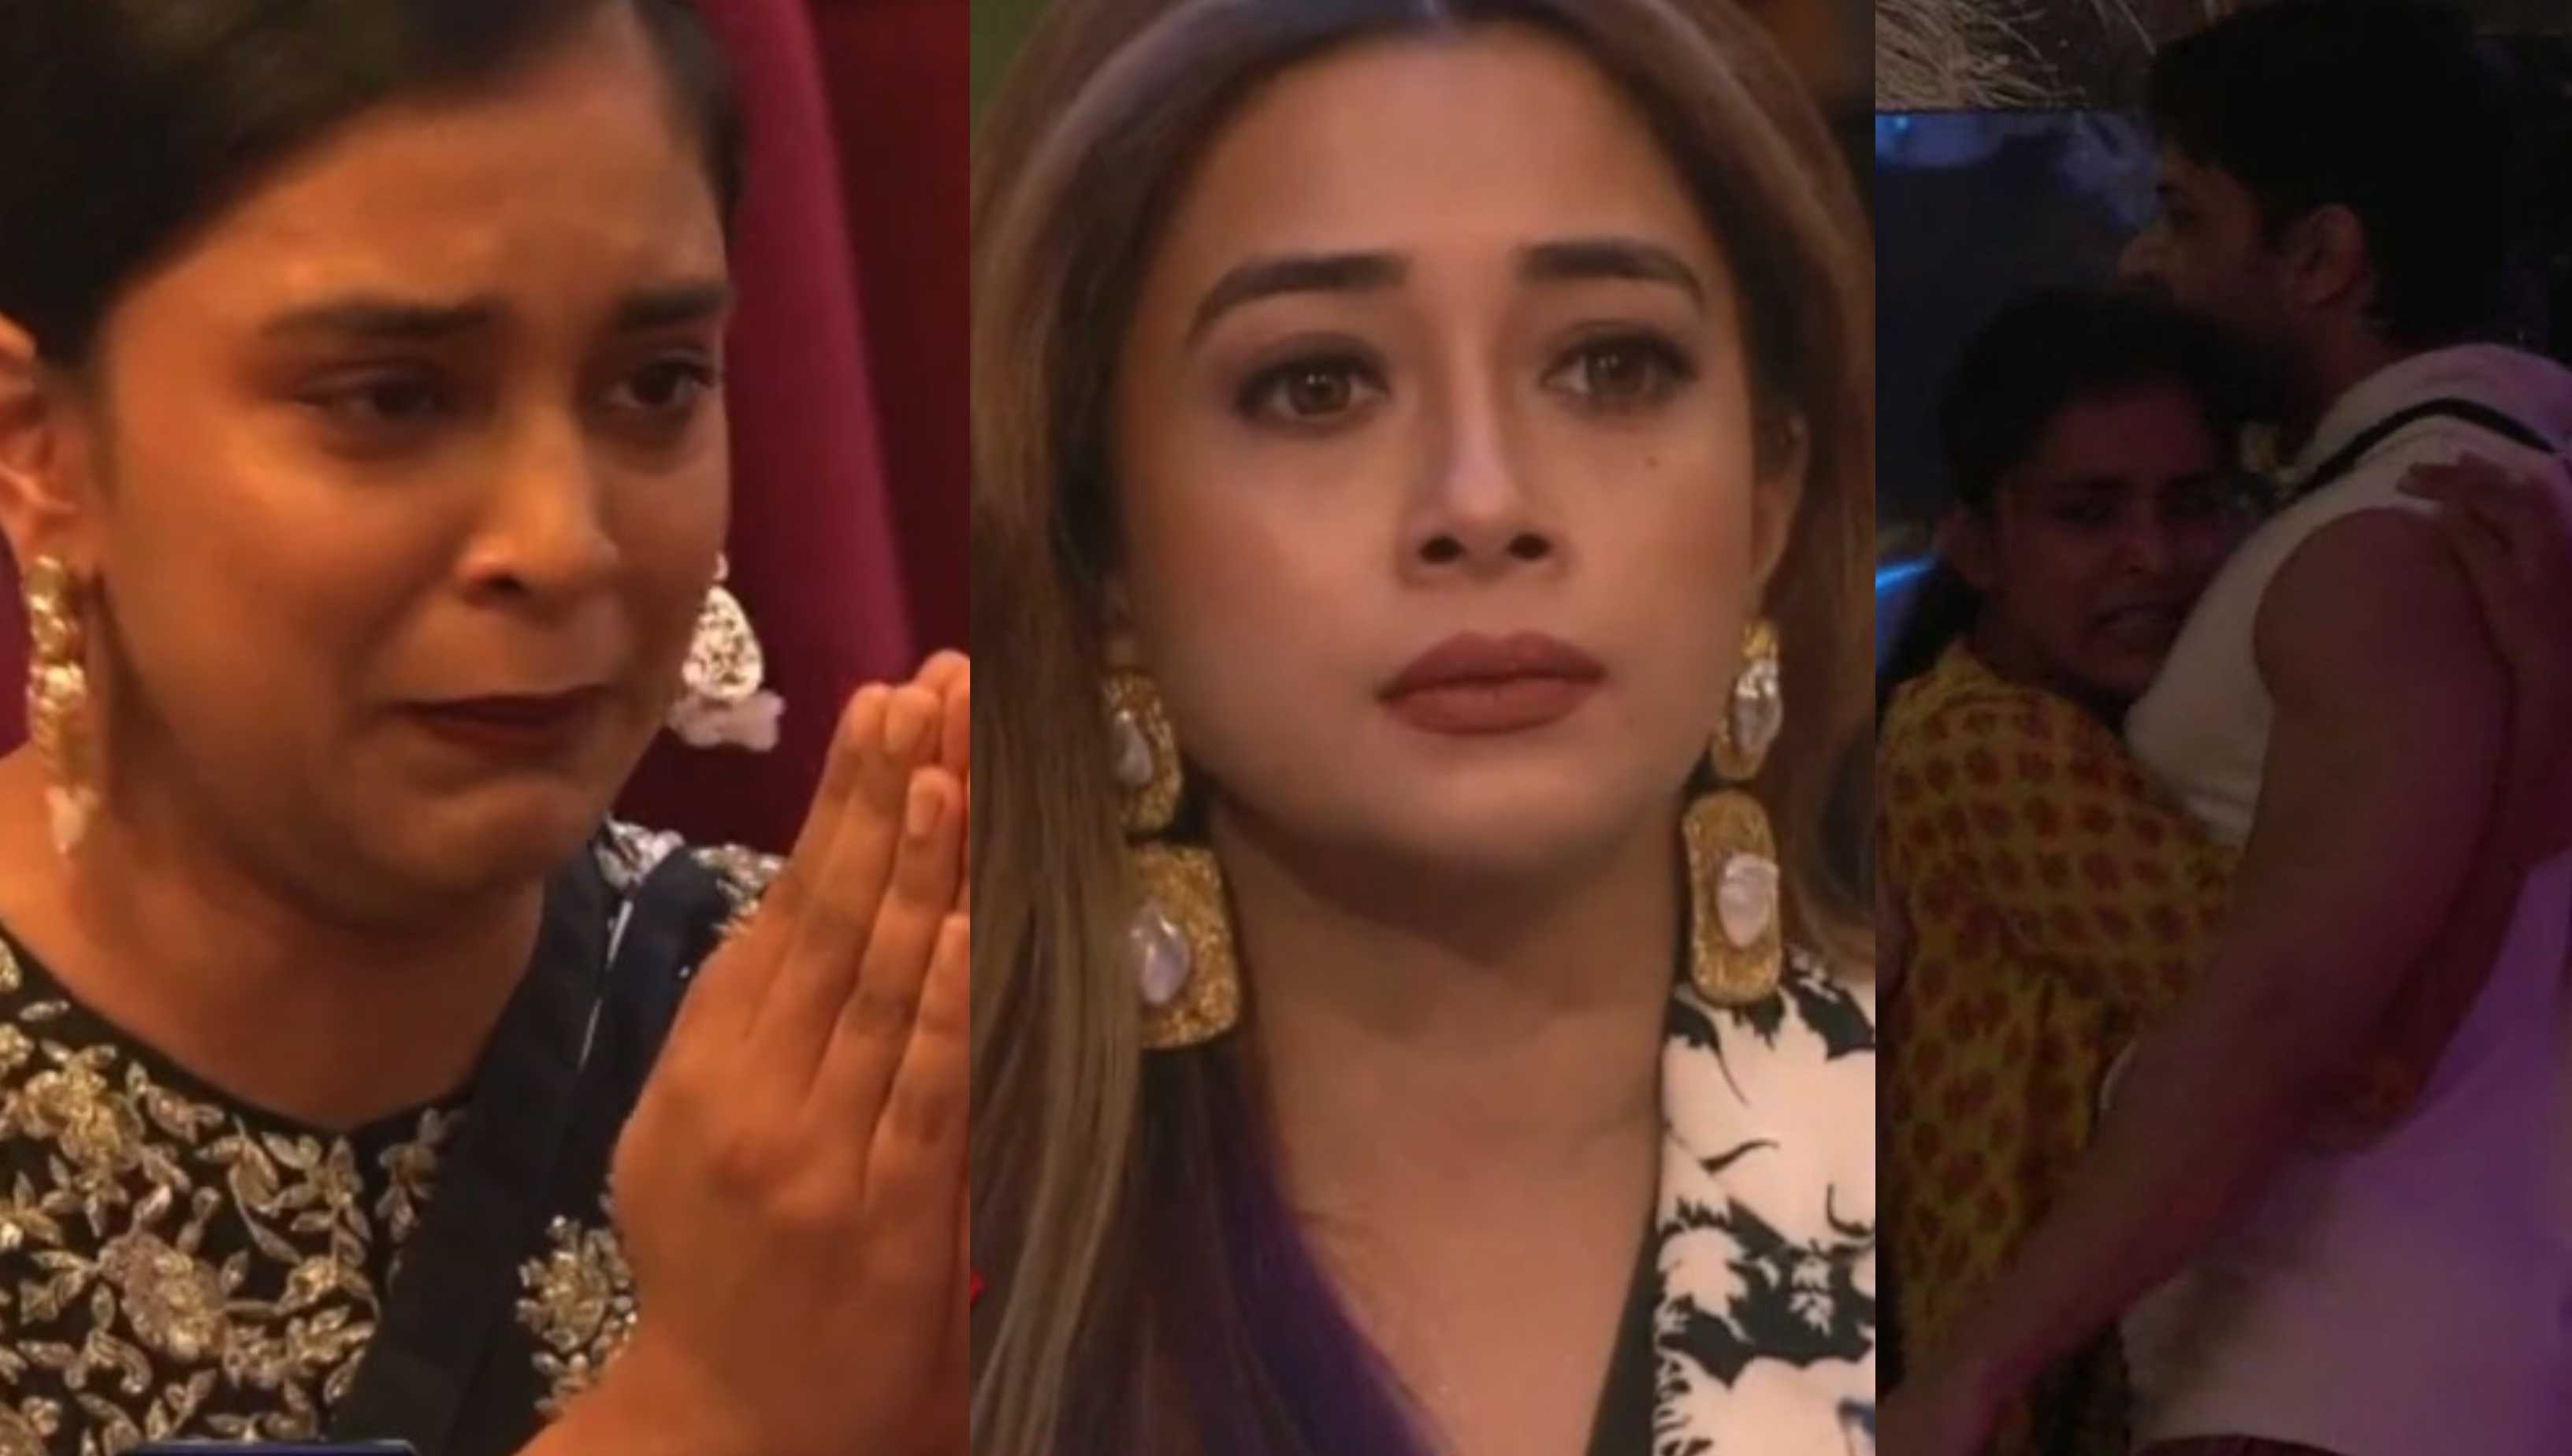 Bigg Boss 16: Sumbul waits for Shalin outside the bathroom, reveals Tina; netizens are divided over her behavior